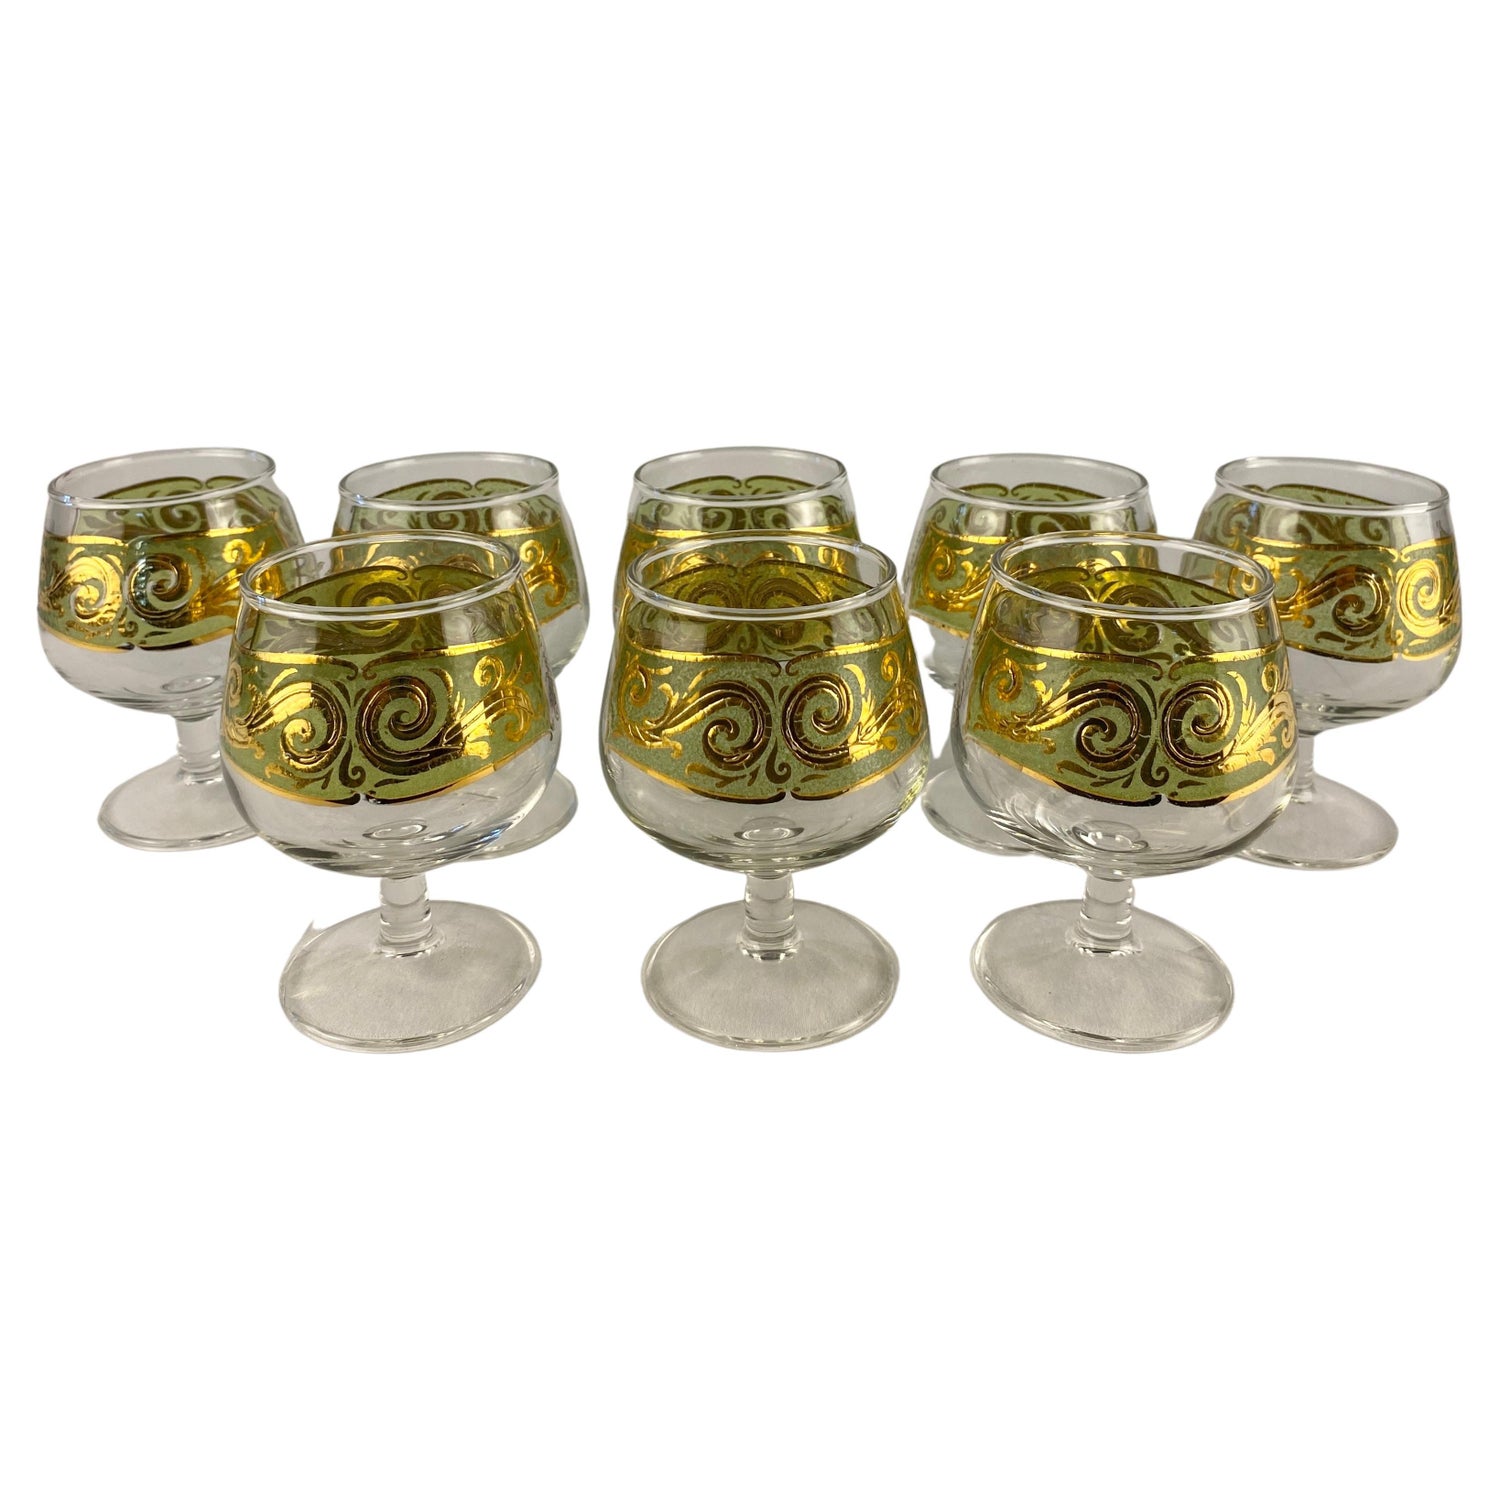 Wine Glasses, CULVER TYROL, Crystal Glasses, Signed 22K Gold Band,  Encrusted Wide Trim Small Classic Glasses Made USA, Beautiful Replacement 